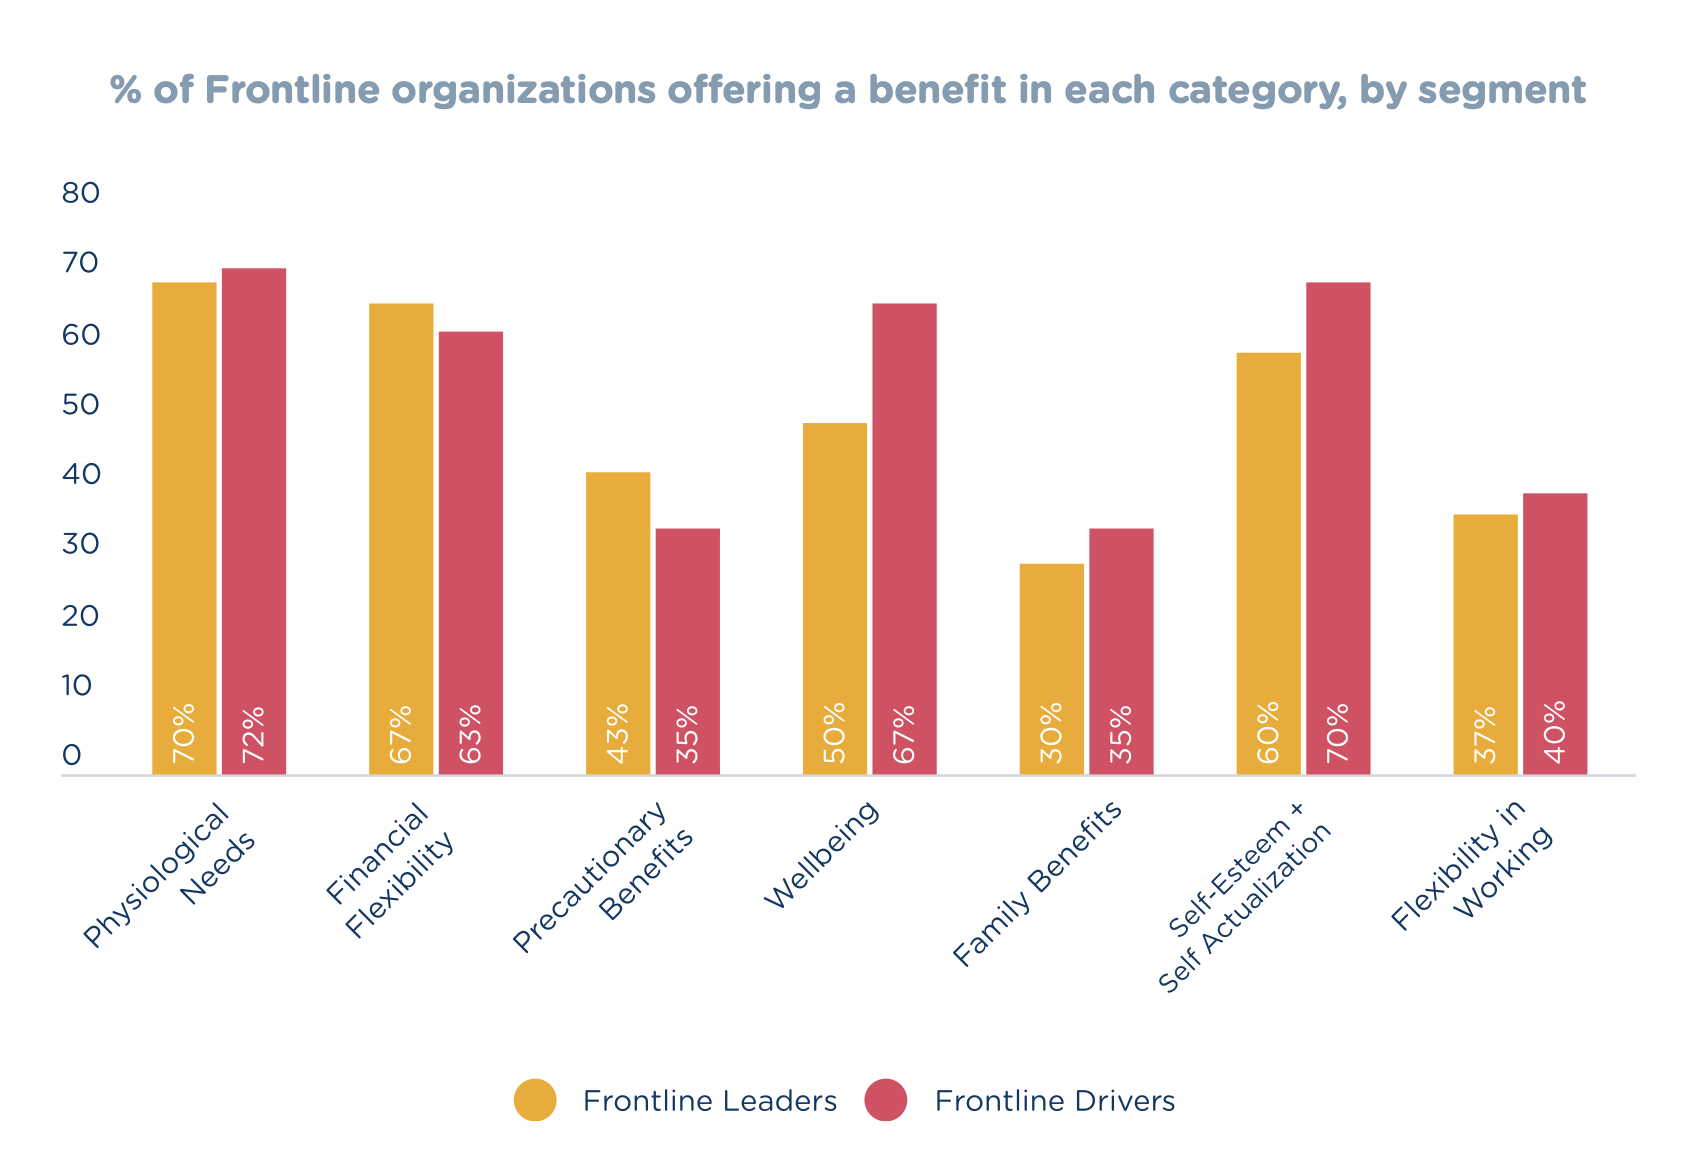 Comparison chart of the percent of frontline organizations offering benefits across multiple categories.